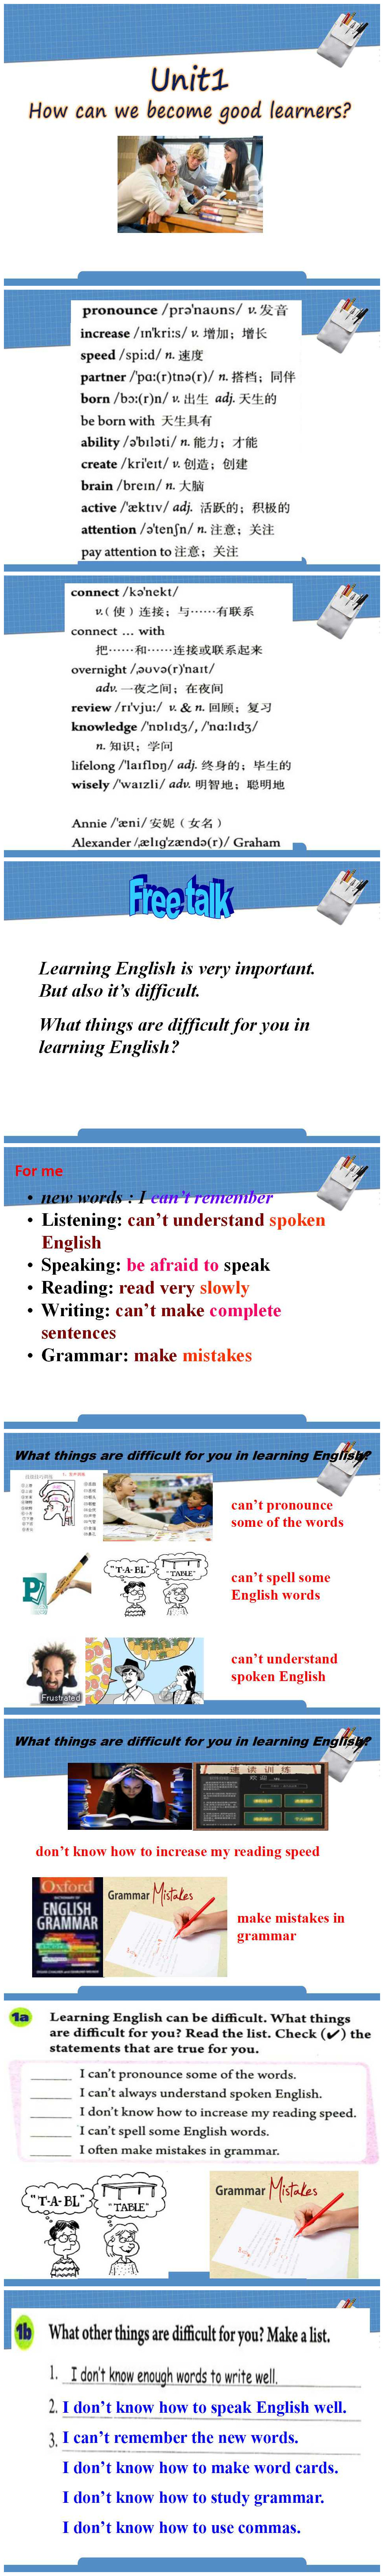 《How can we become good learners?》PPT课件3